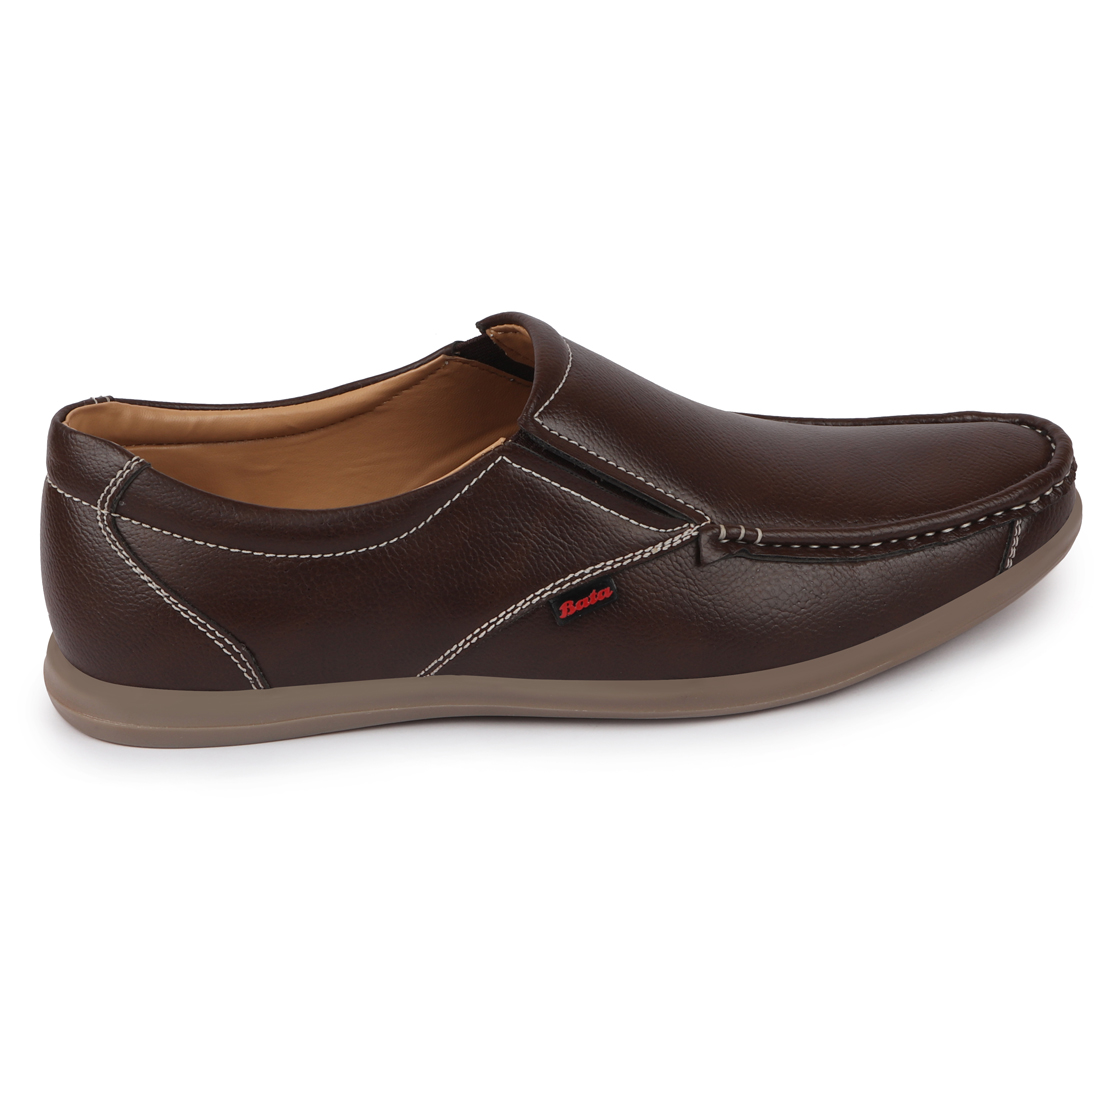 Buy Bata Mens Brown Loafers Casual Loafers Online @ ₹1079 from ShopClues